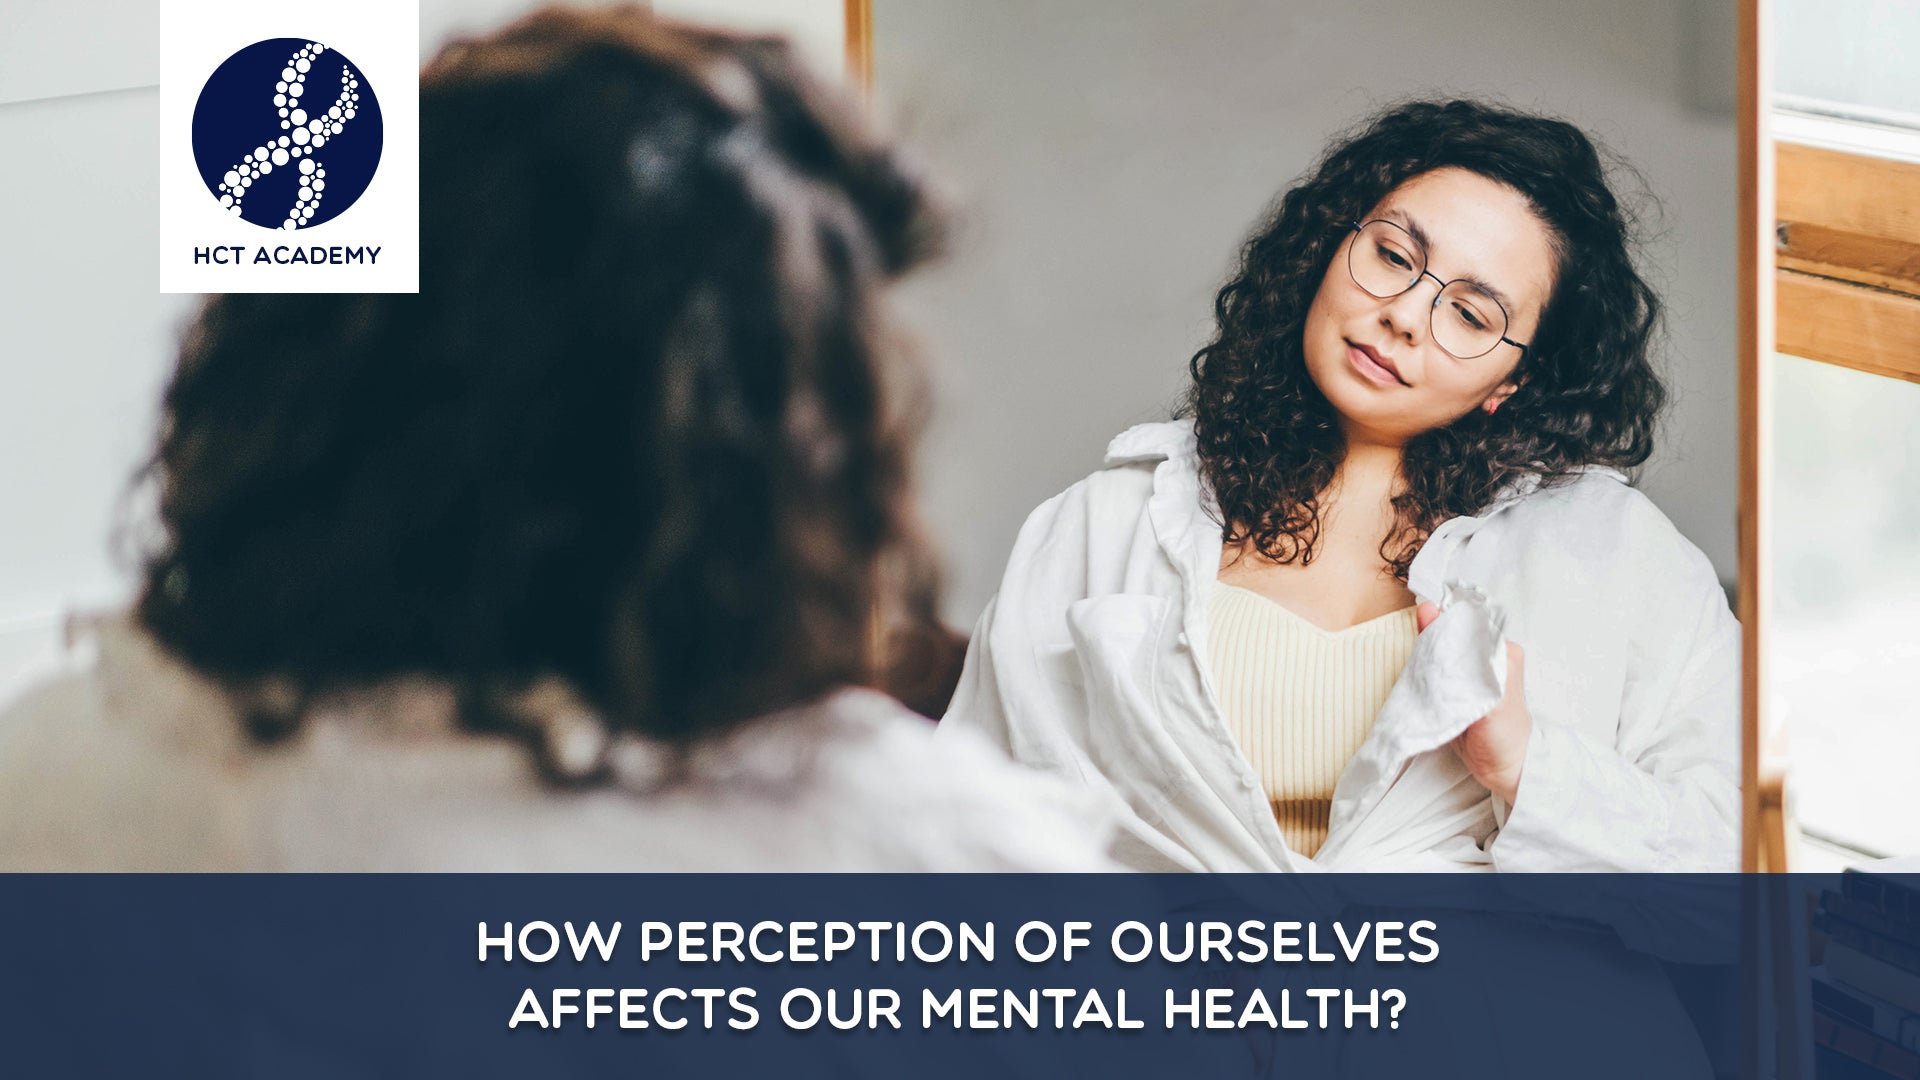 How perception of ourselves affects our mental health?